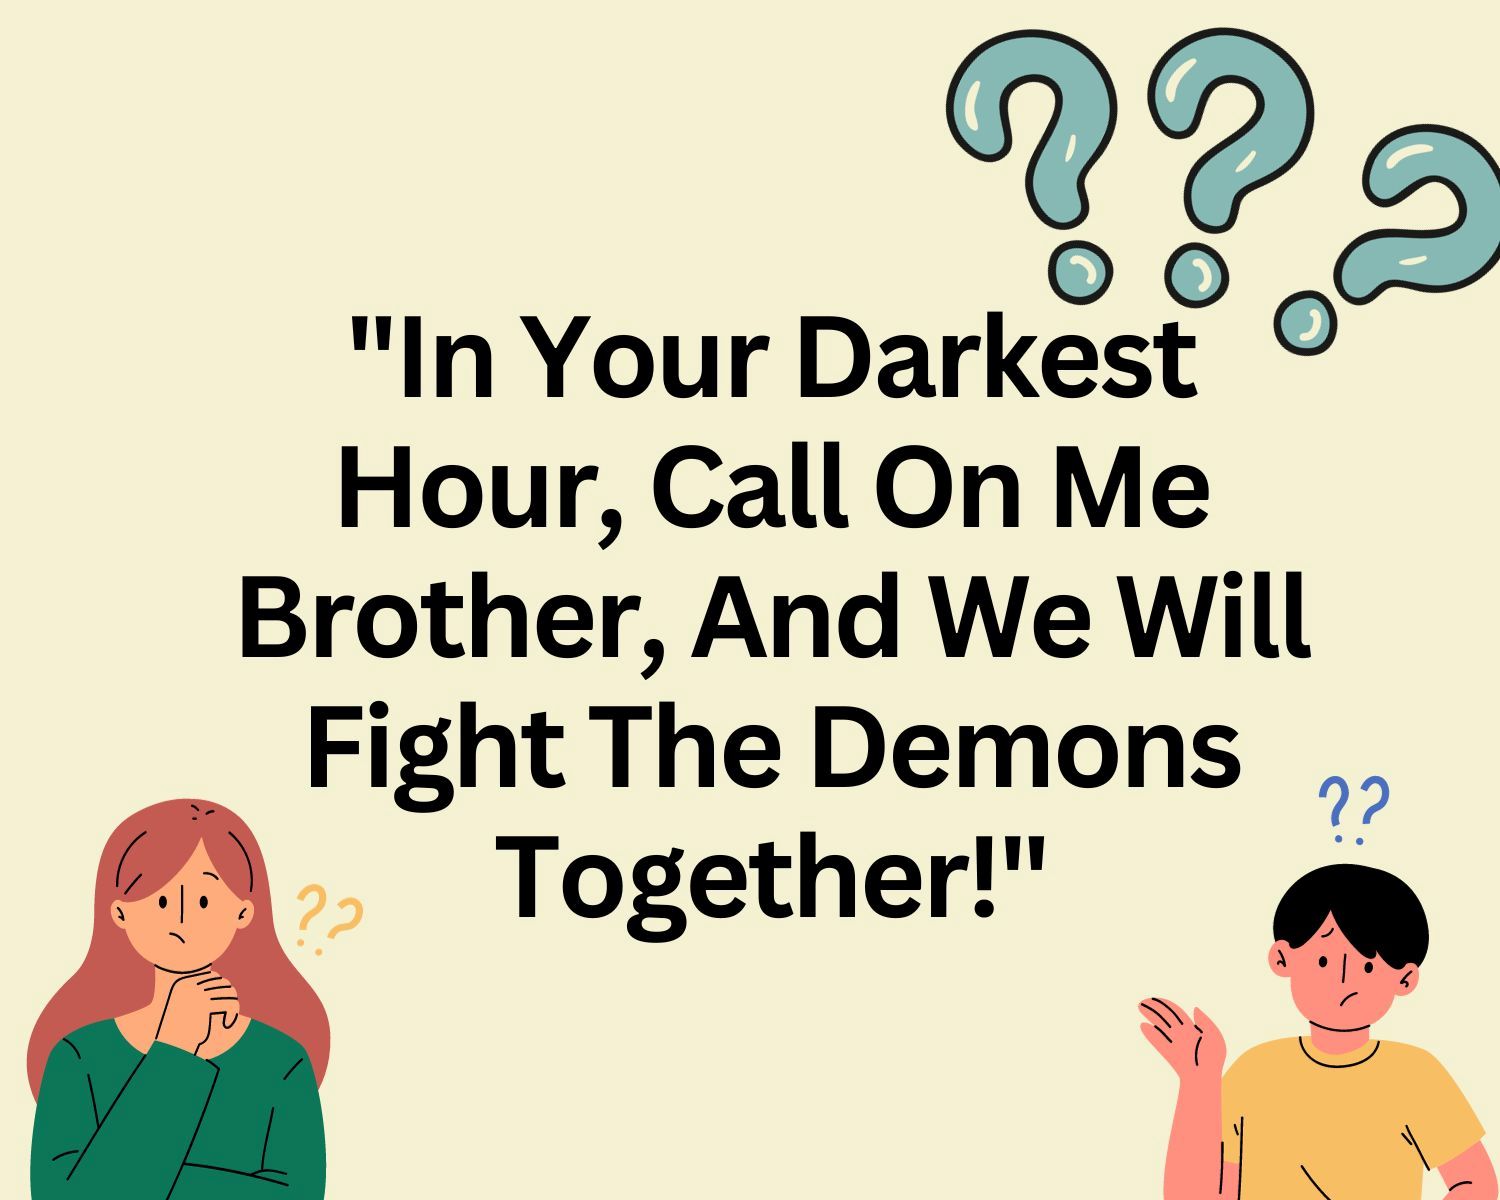 The Origin Of The Powerful Quote: “In Your Darkest Hour, Call On Me Brother, And We Will Fight The Demons Together!”